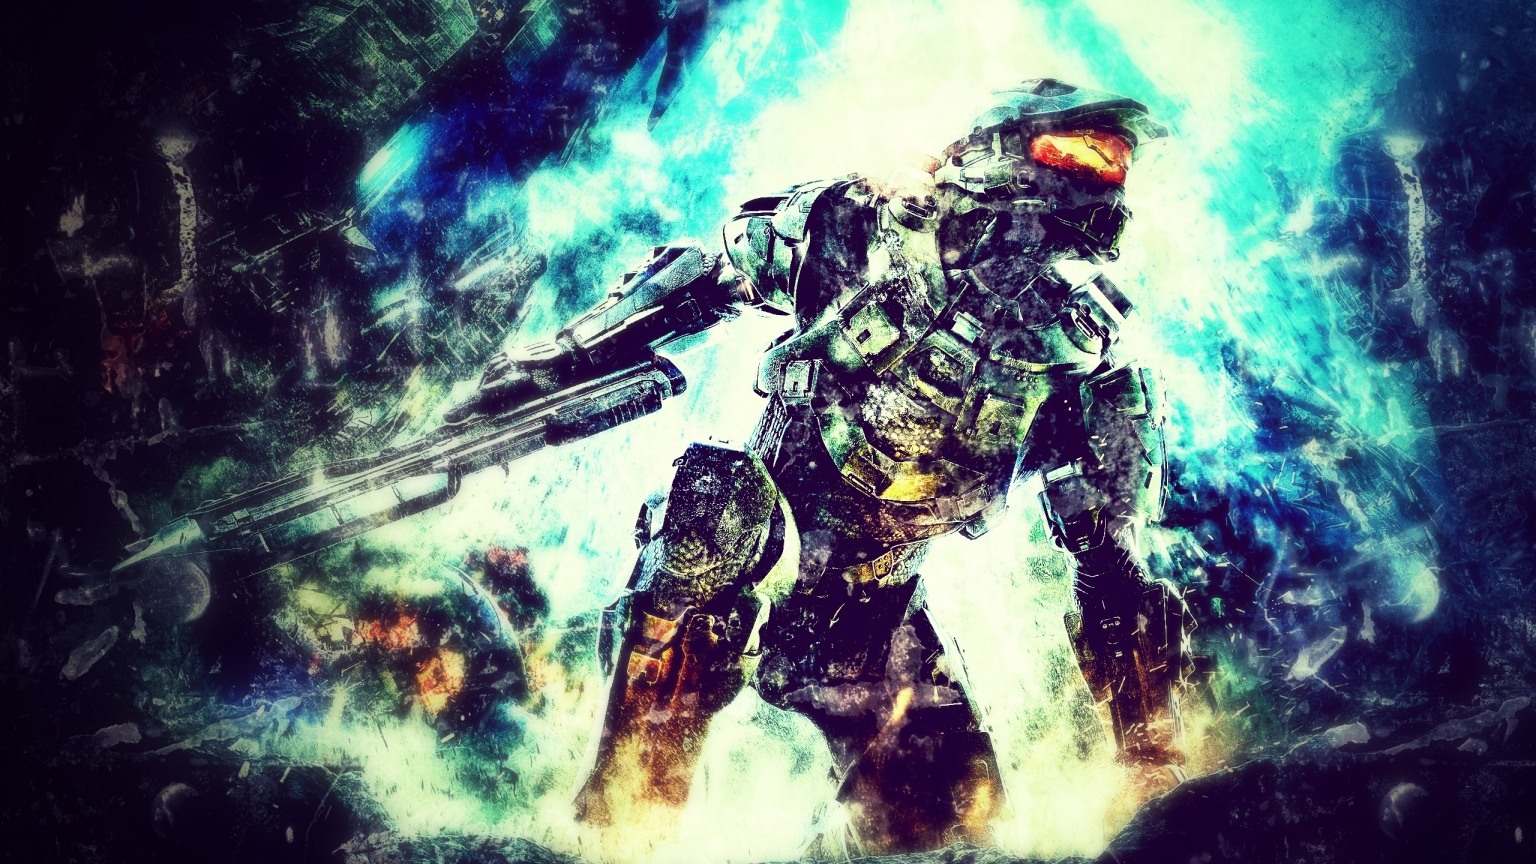 Halo 4 for 1536 x 864 HDTV resolution